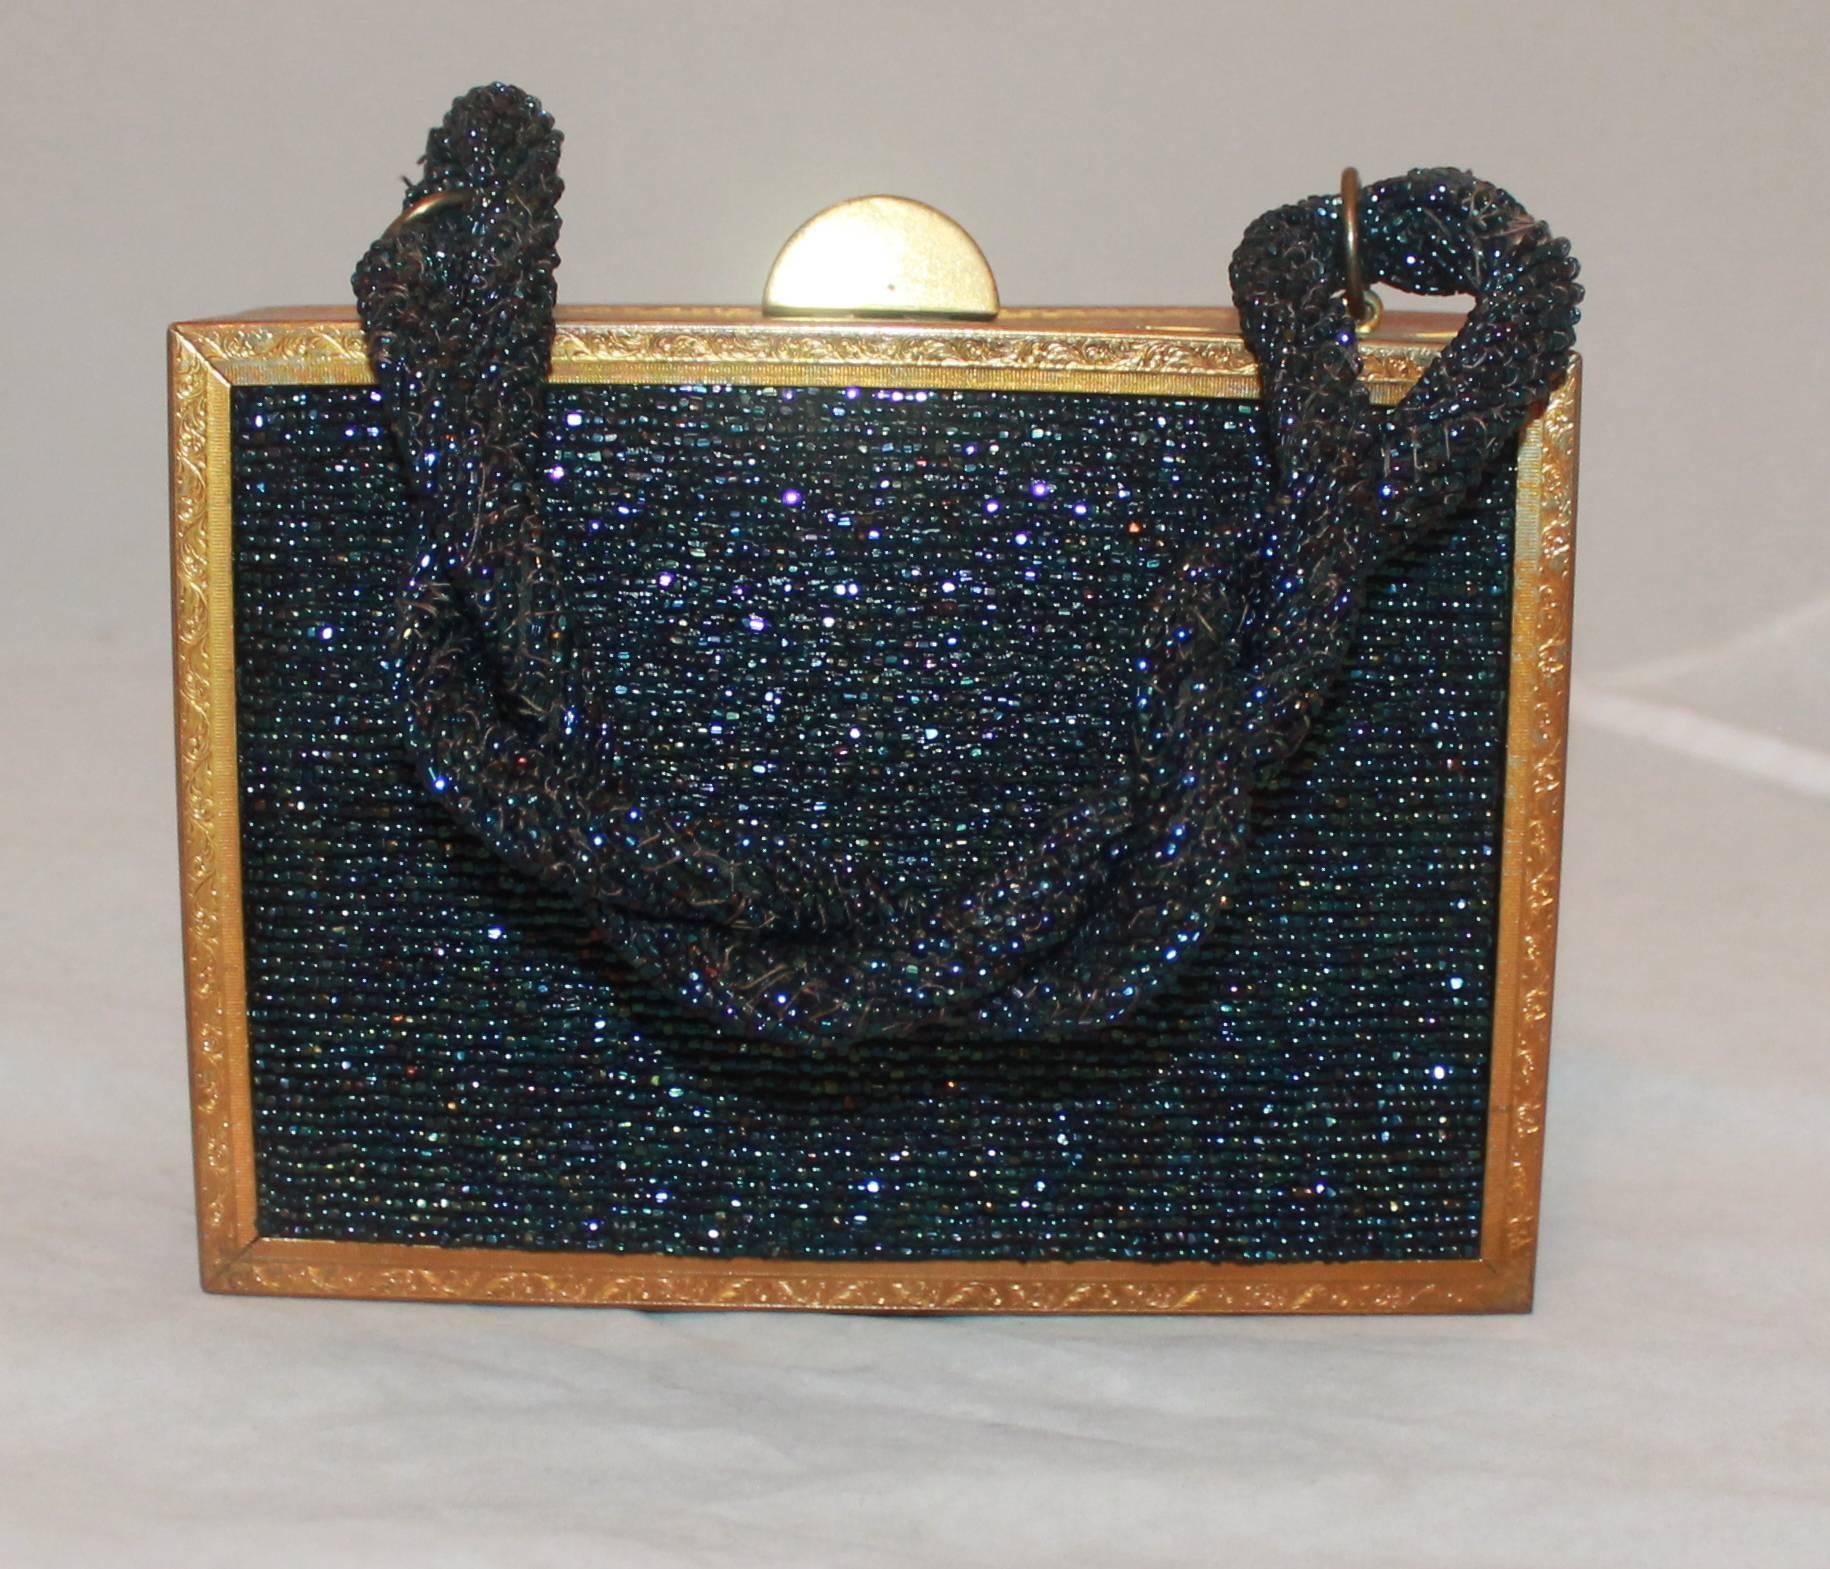 Evans Navy & Gold Vintage Beaded & Metal Rectangular Handbag - Circa 1950's.  This handbag is in good vintage condition, through age it became slightly unaligned.  It features a goldtone metal frame and lovely navy multi beading.  Also, the handle